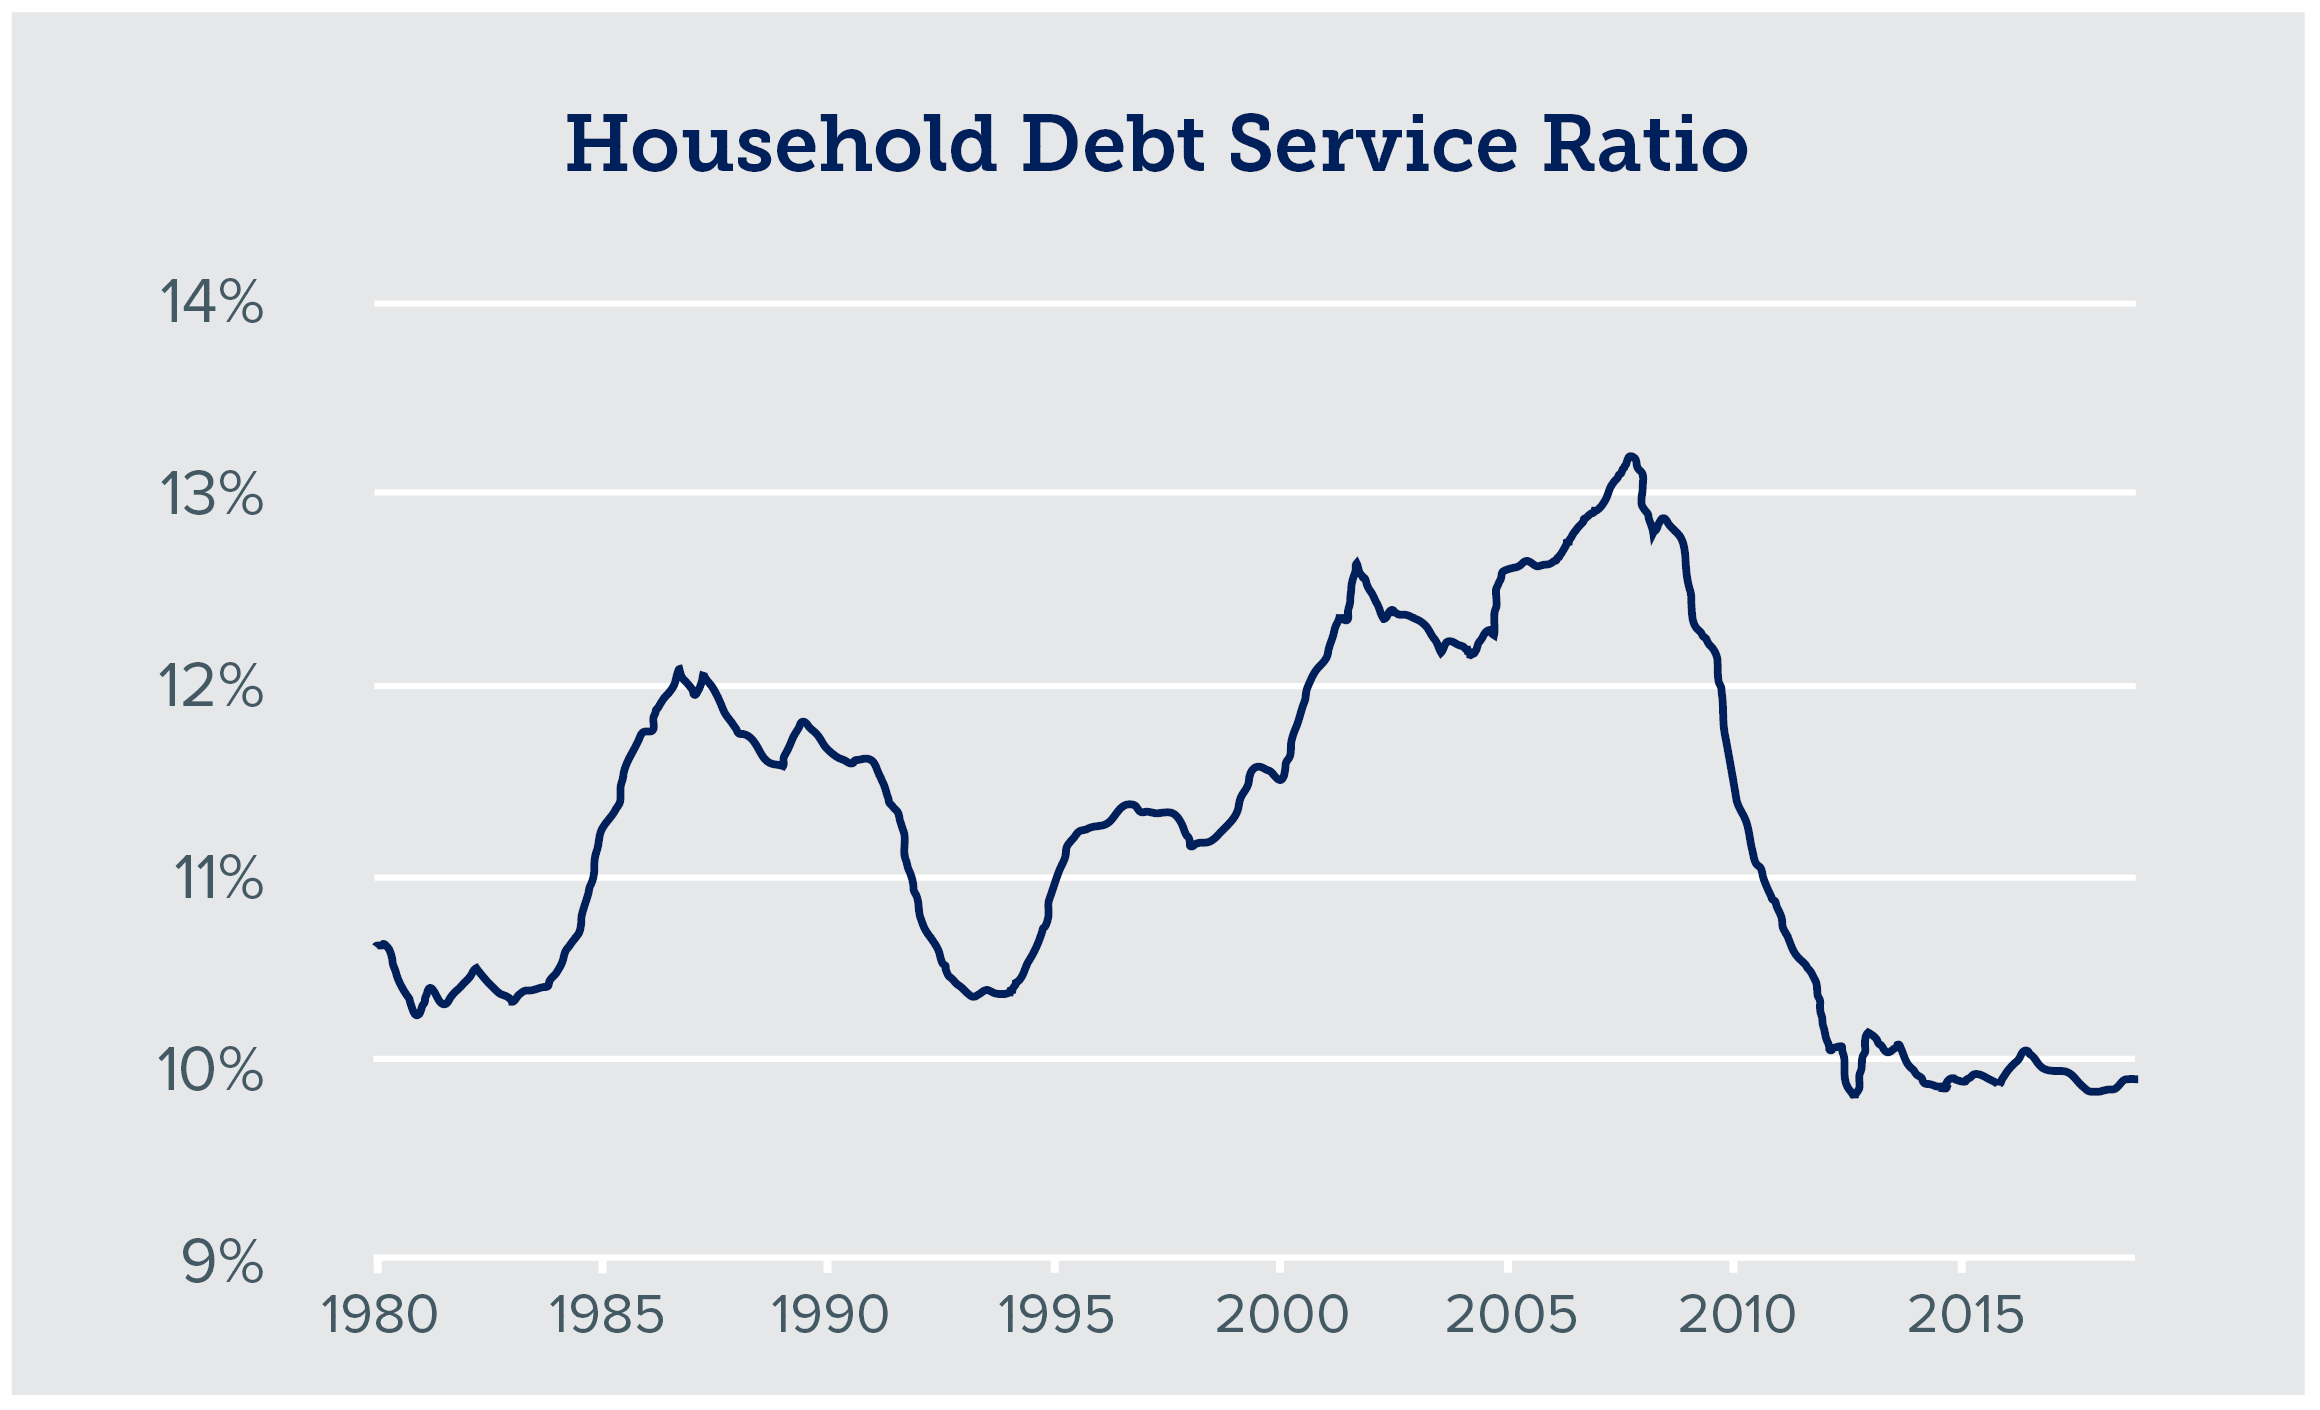 bar graph of household debt service ratio over time